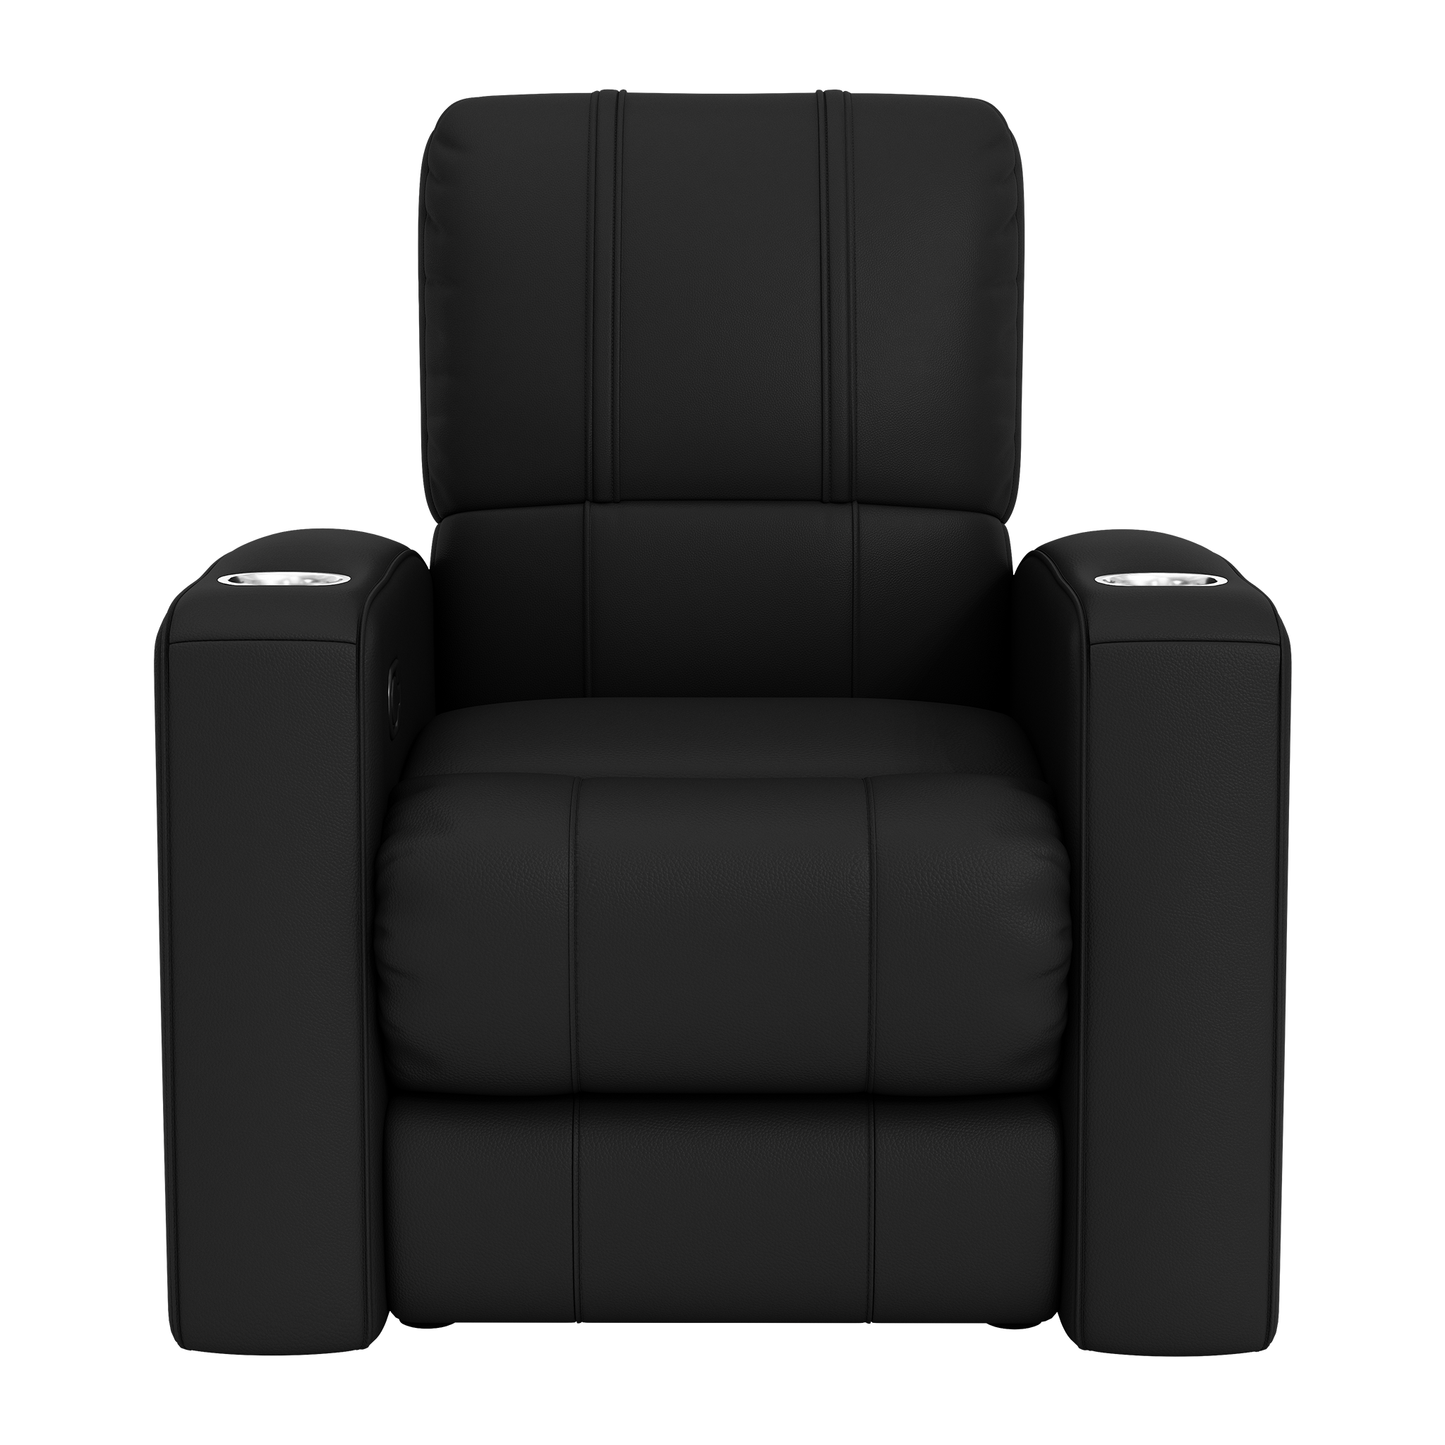 Relax Home Theater Recliner with Maine Black Bears Logo